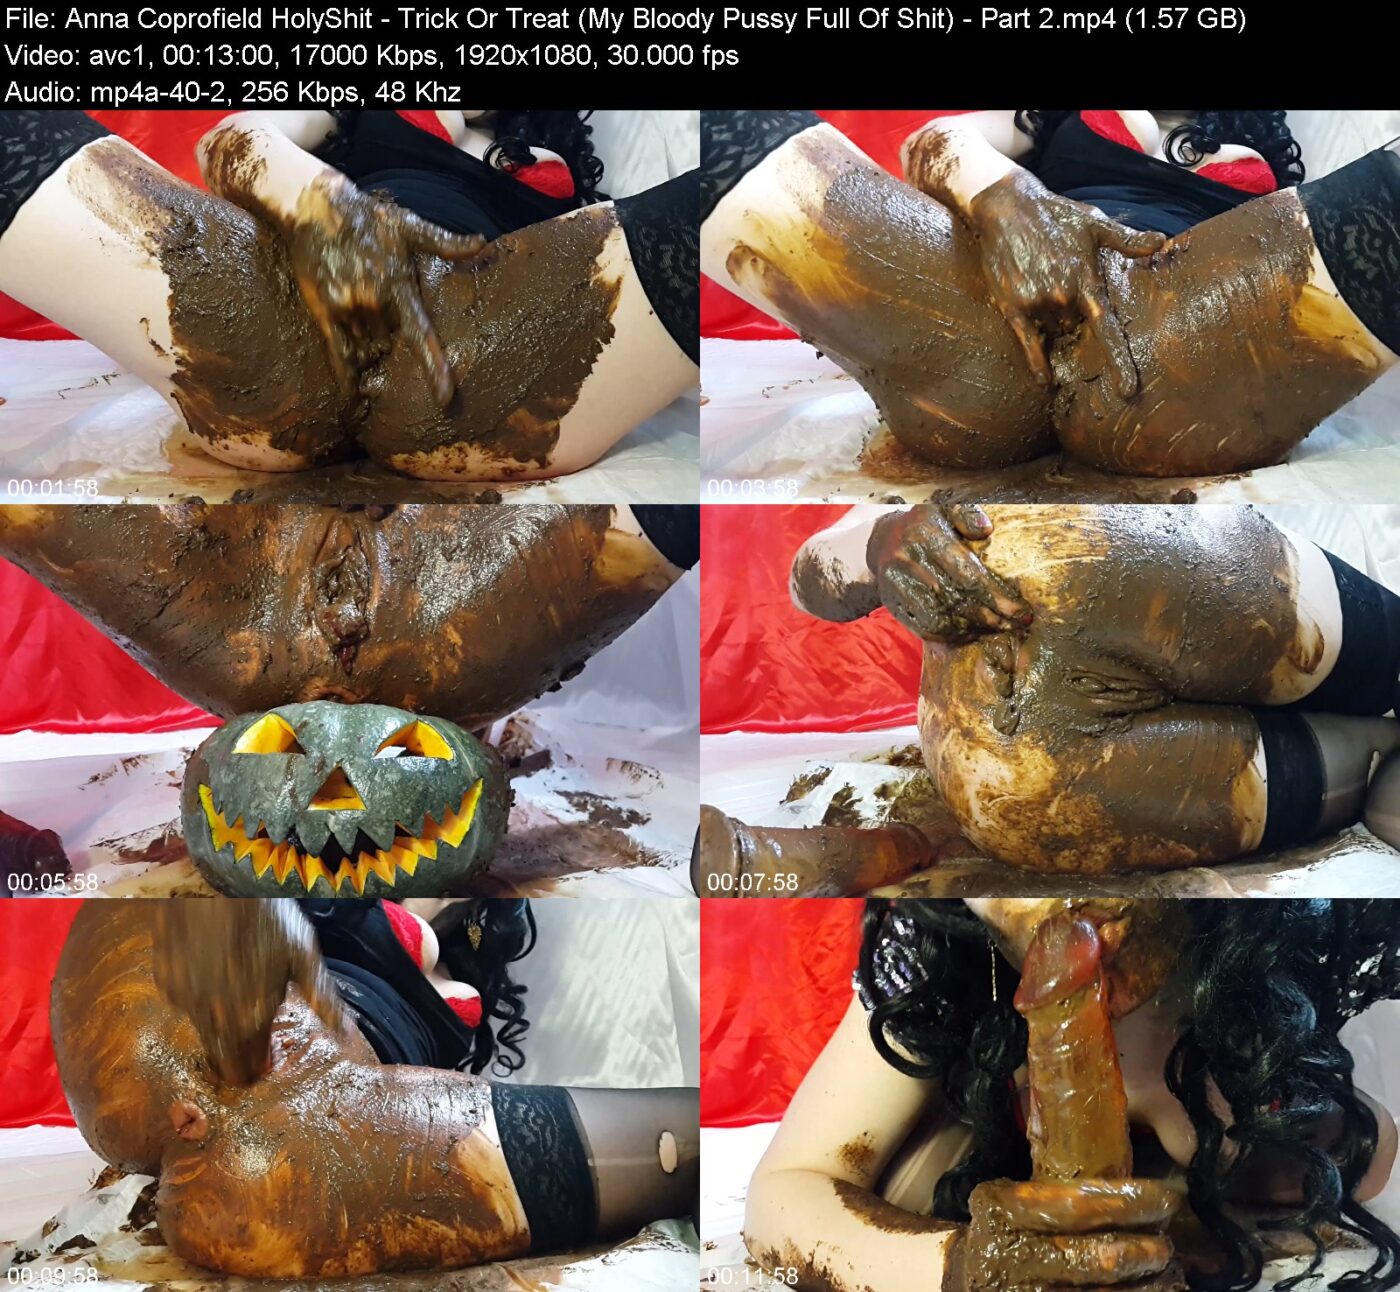 Actress: Anna Coprofield HolyShit. Title and Studio: Trick Or Treat (My Bloody Pussy Full Of Shit) – Part 2